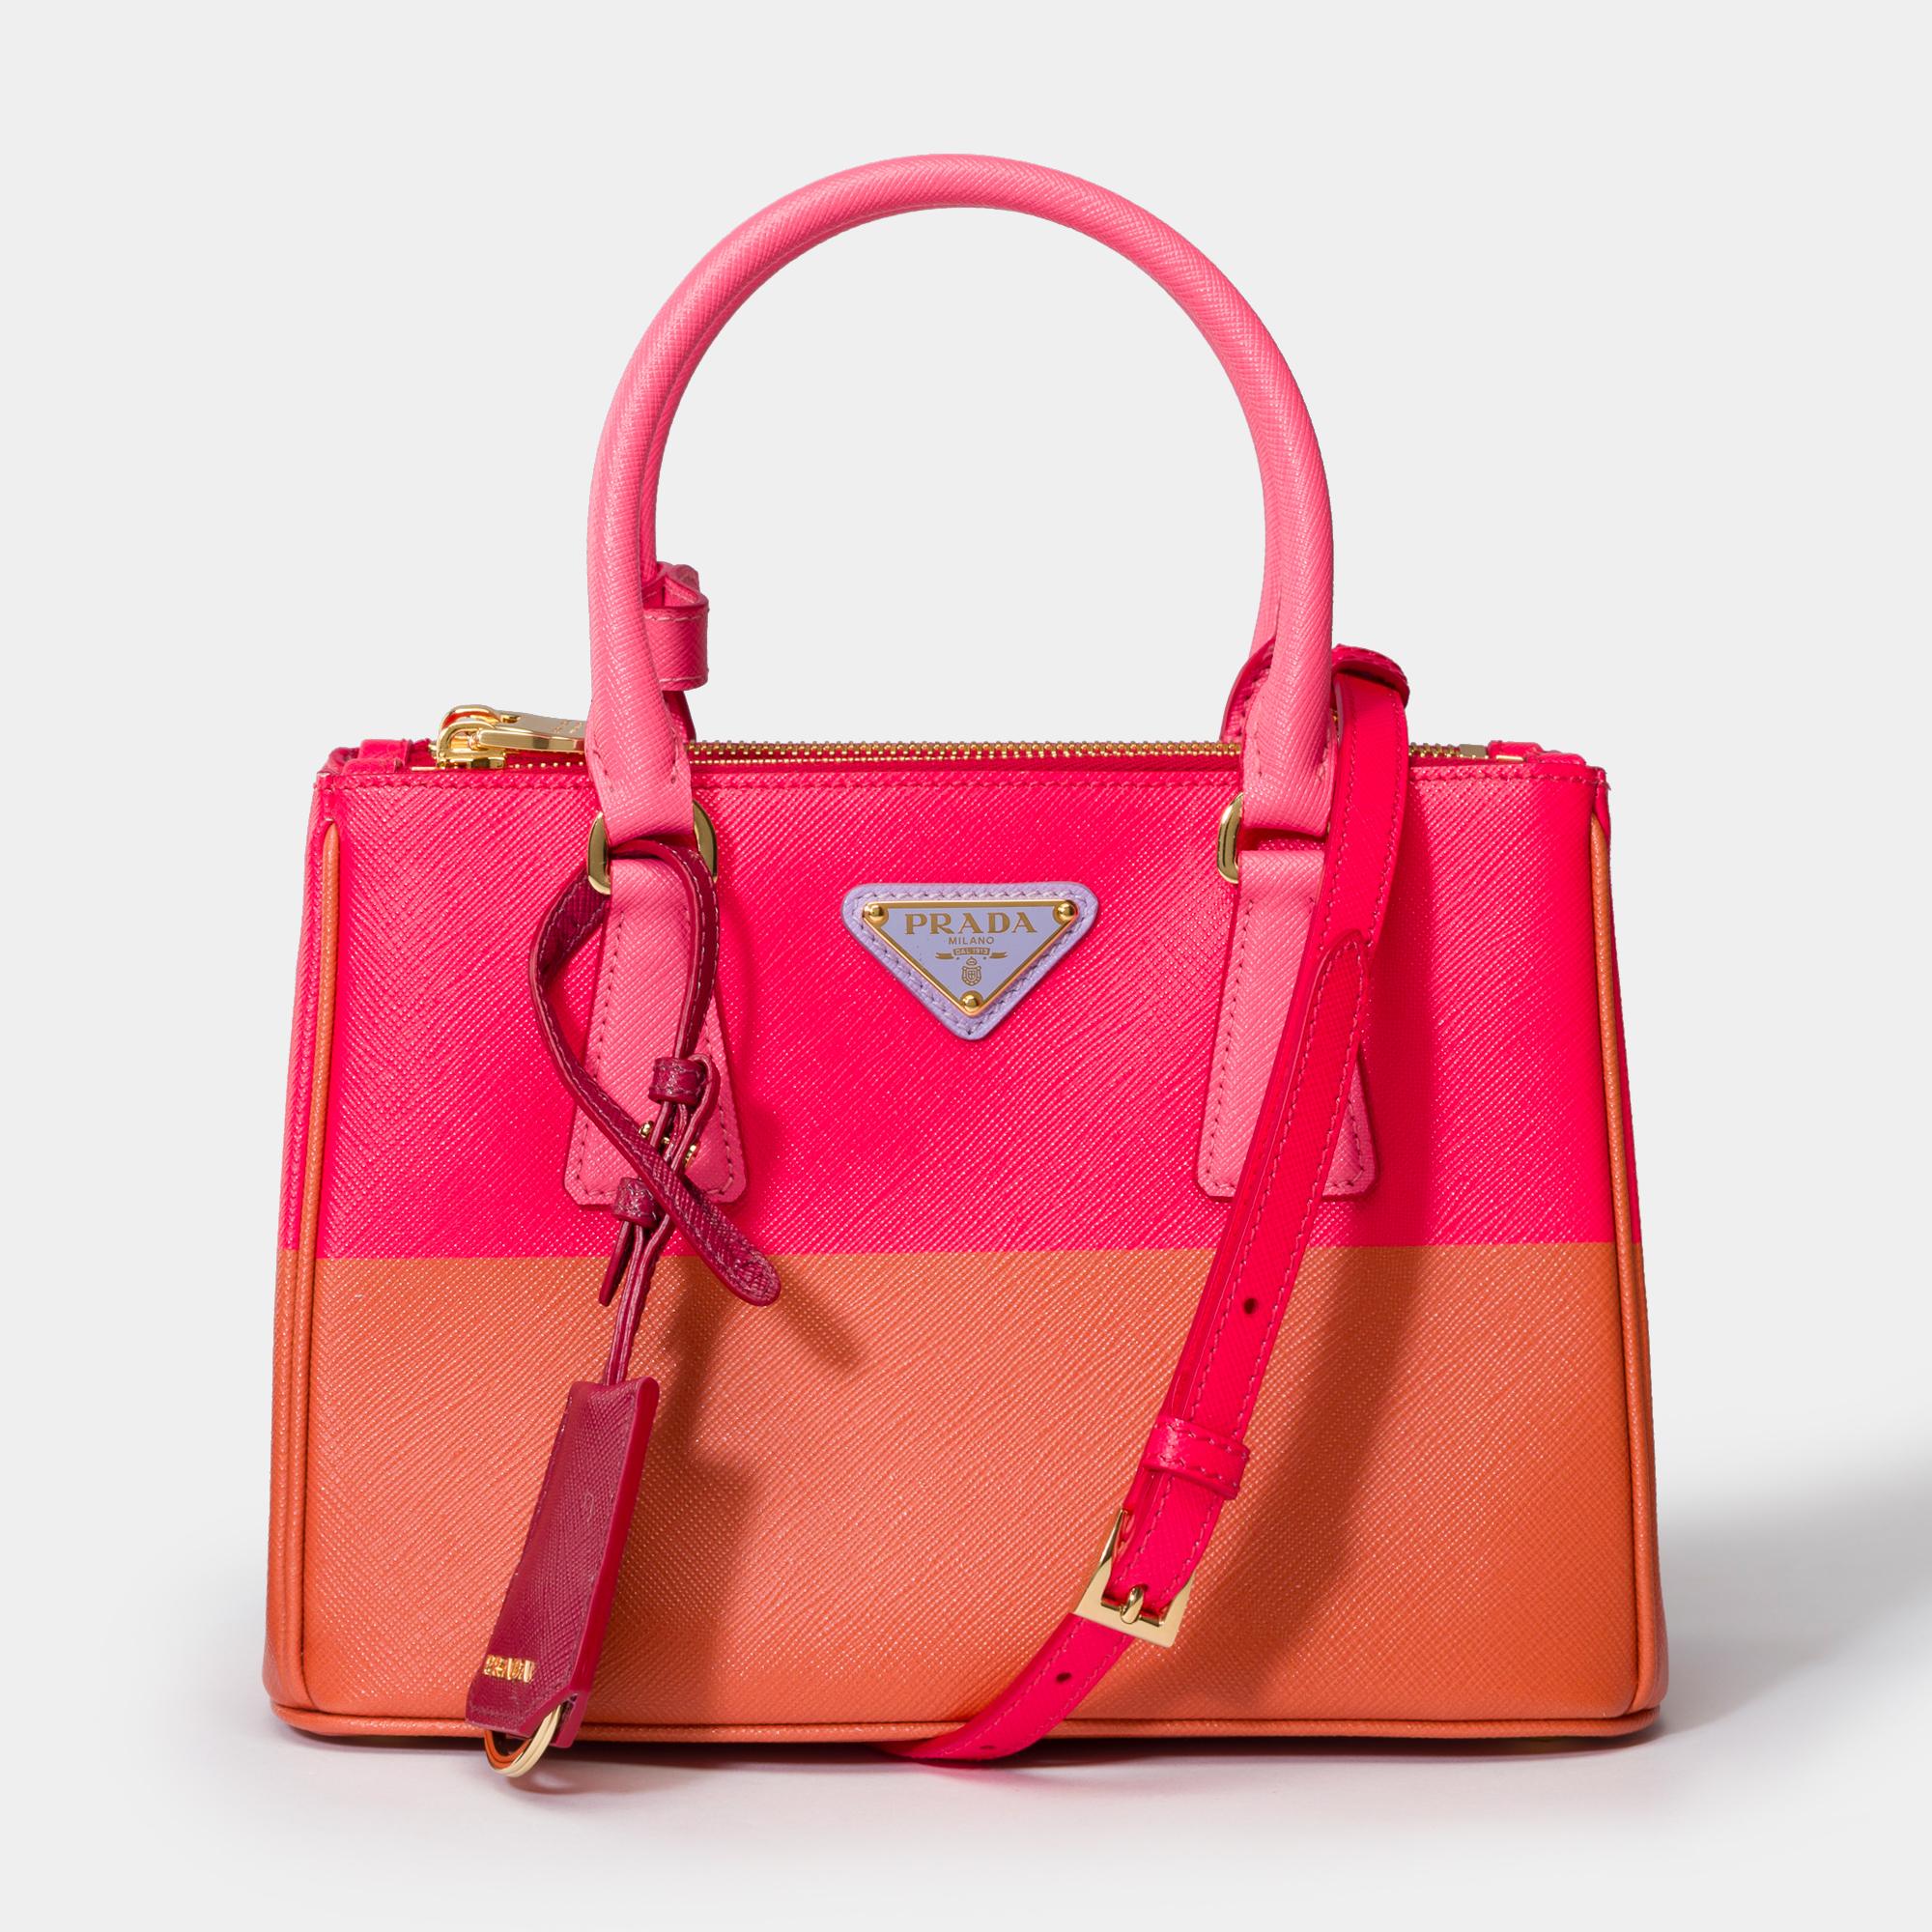 Redefined and recreated season after season, the Galleria bag is a neo-classical archetype of Prada proposed here in an exclusive limited edition with vibrant color-block motif printed on distinctive Saffiano leather. Pop-inspired colors reflect in